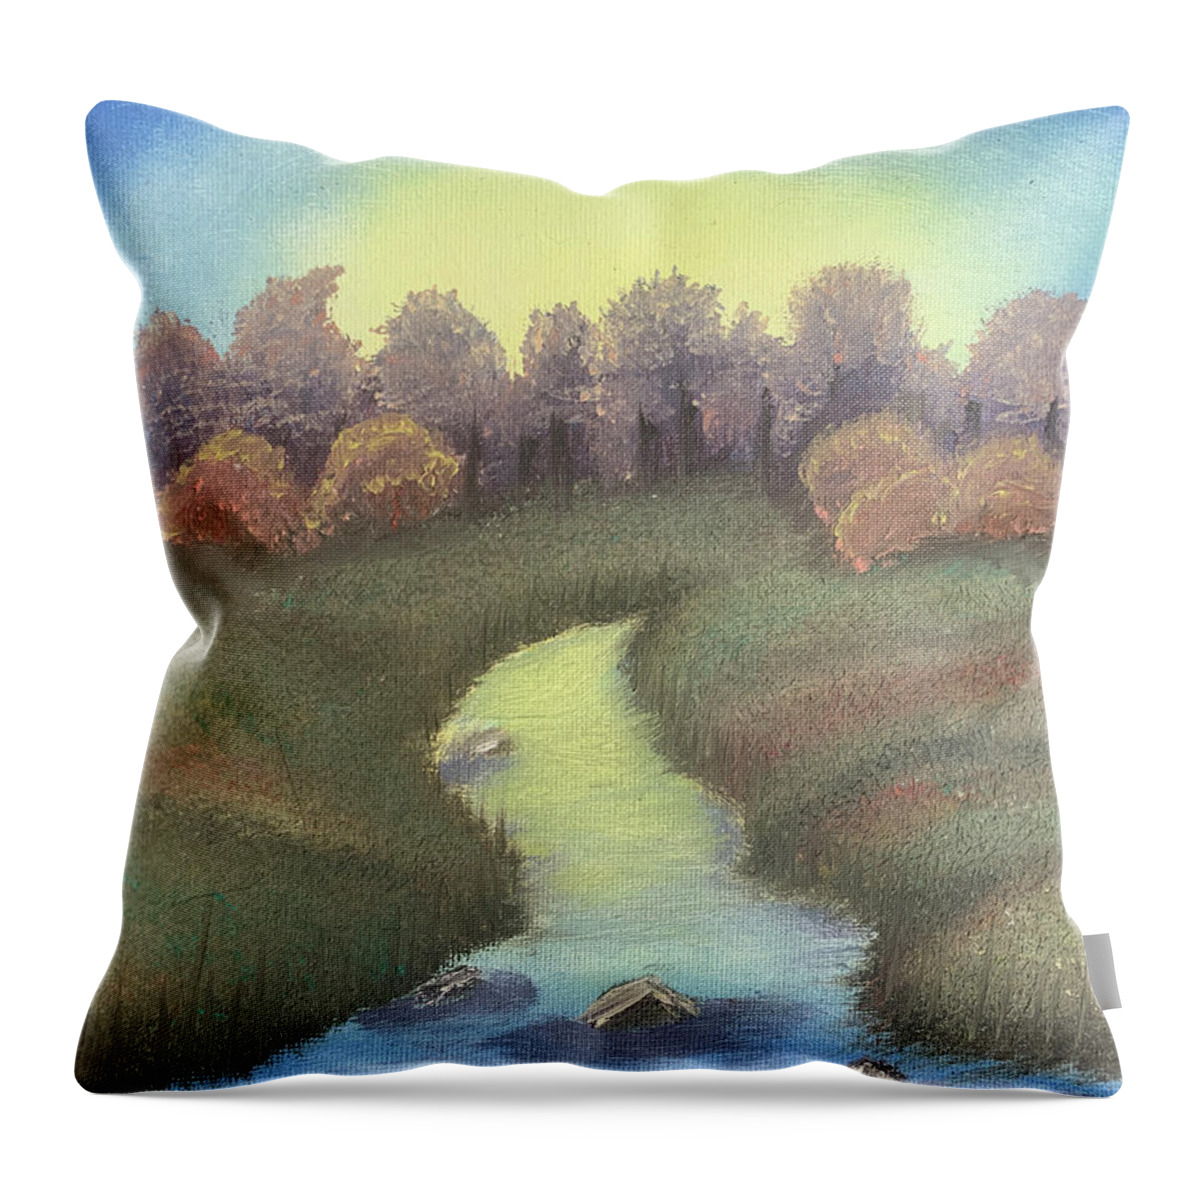 Sunrise Throw Pillow featuring the painting Dawn by Lisa White